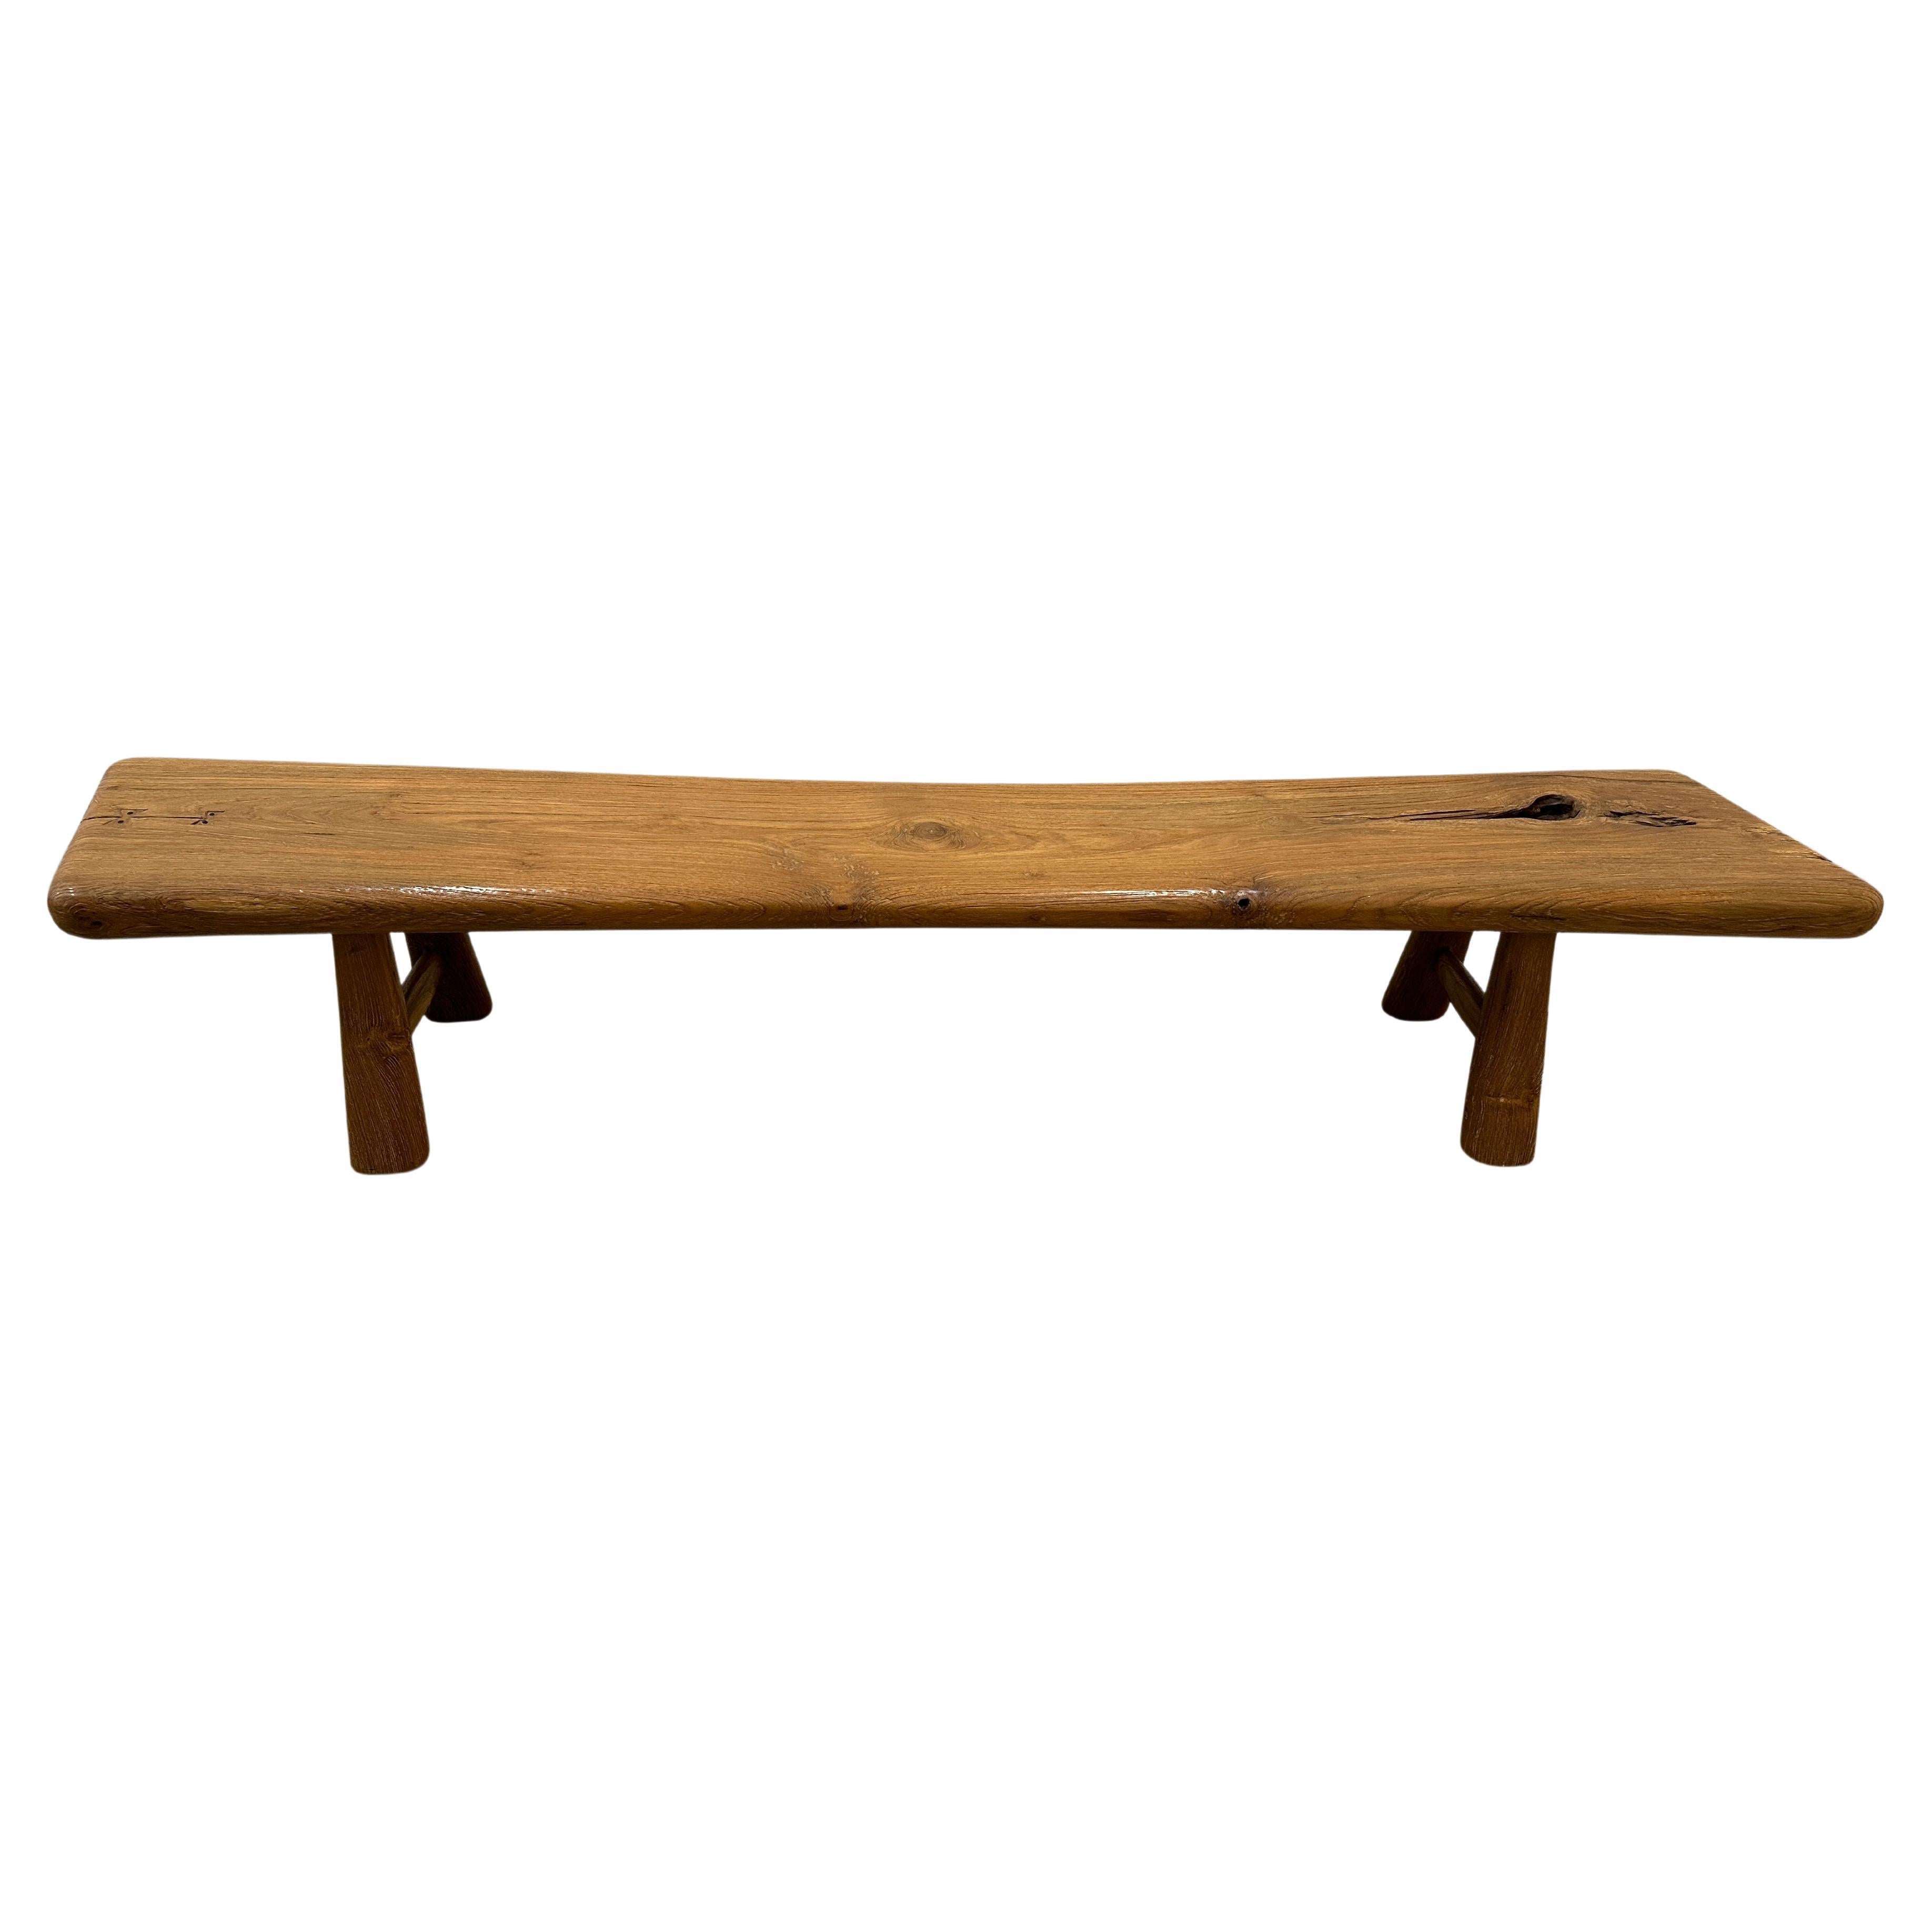 Andrianna Shamaris Midcentury Couture Bench For Sale